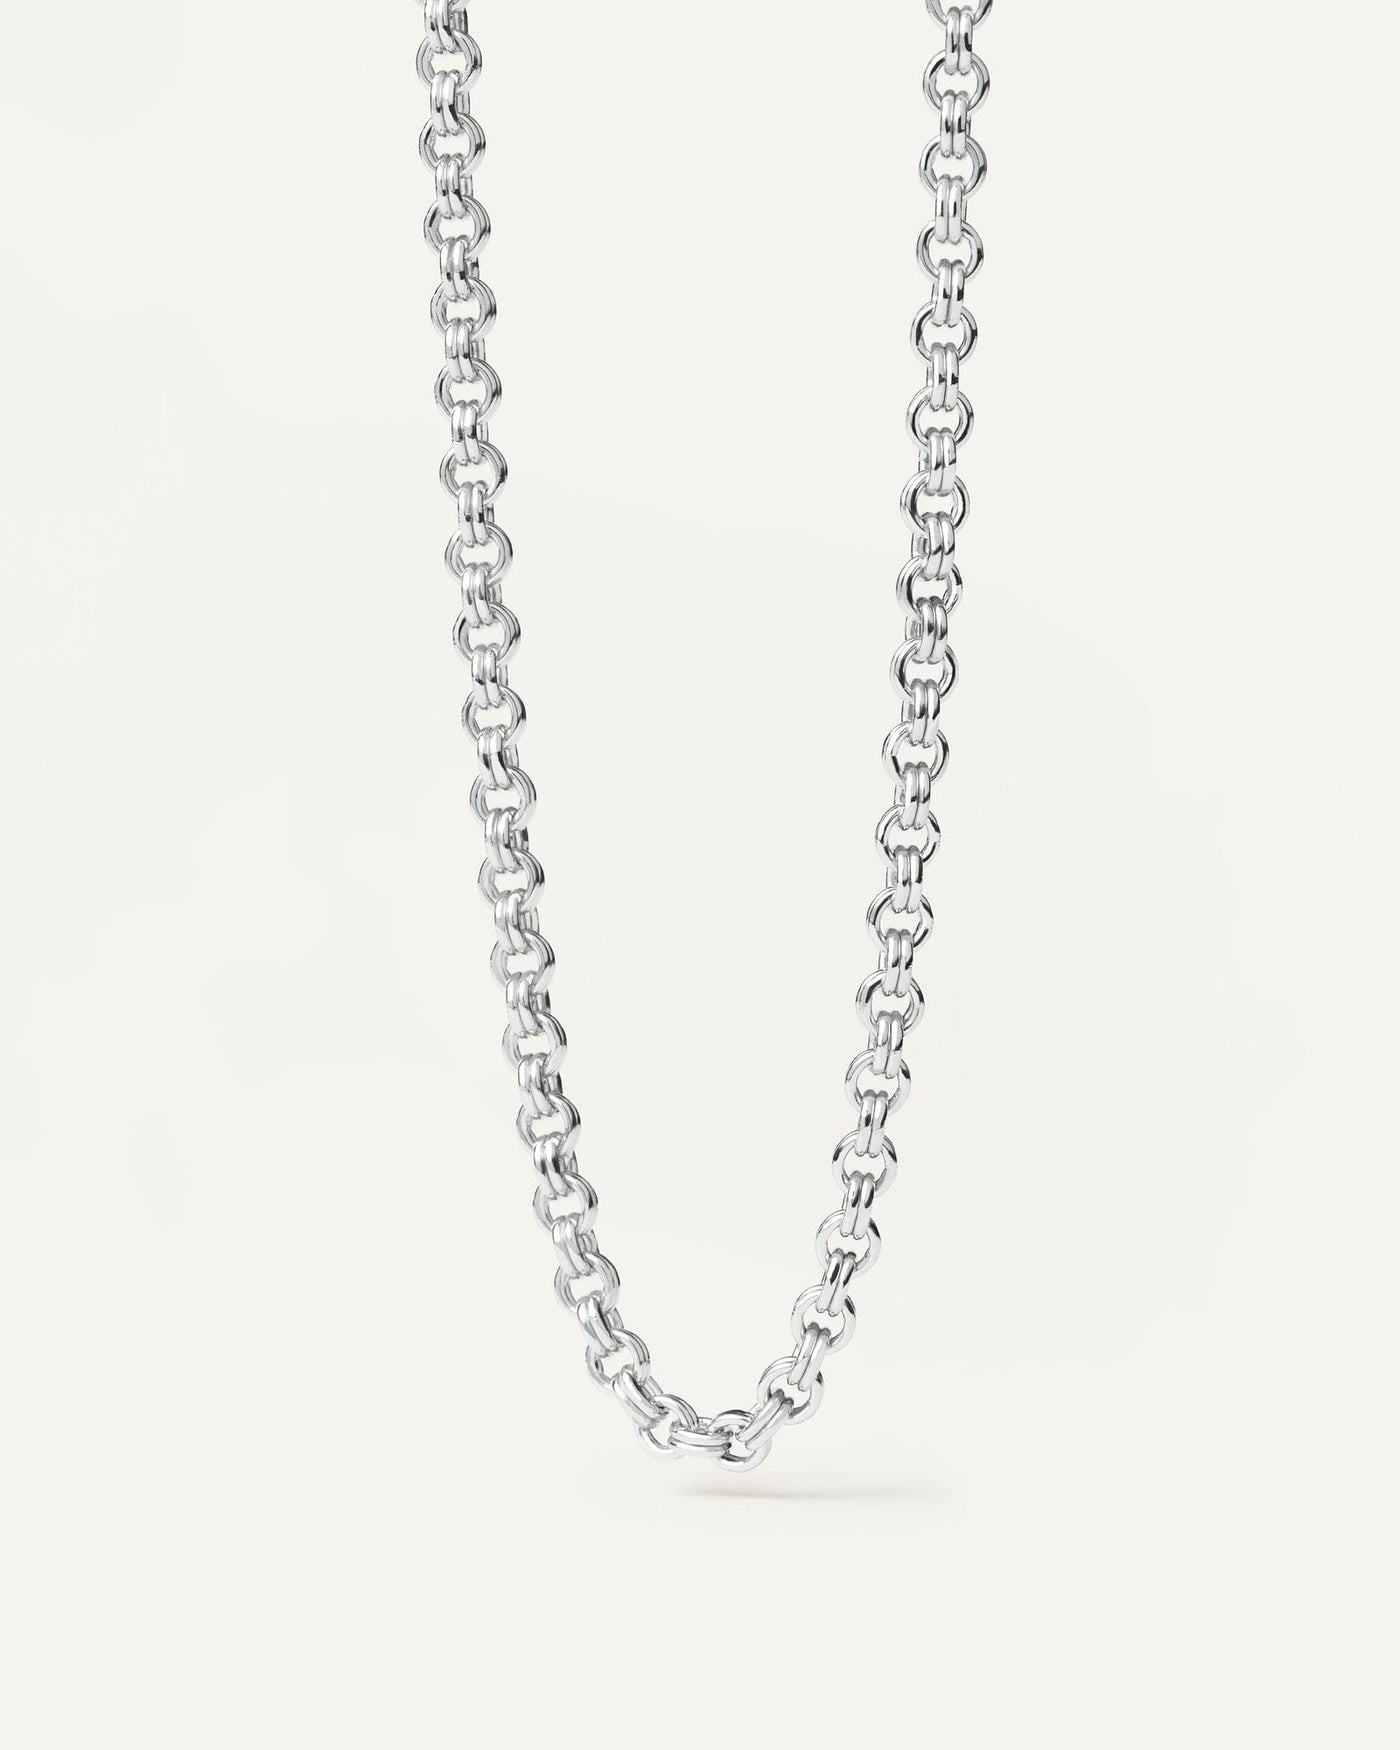 2024 Selection | Neo Silver Necklace. 925 silver chain necklace with double cable links. Get the latest arrival from PDPAOLA. Place your order safely and get this Best Seller. Free Shipping.